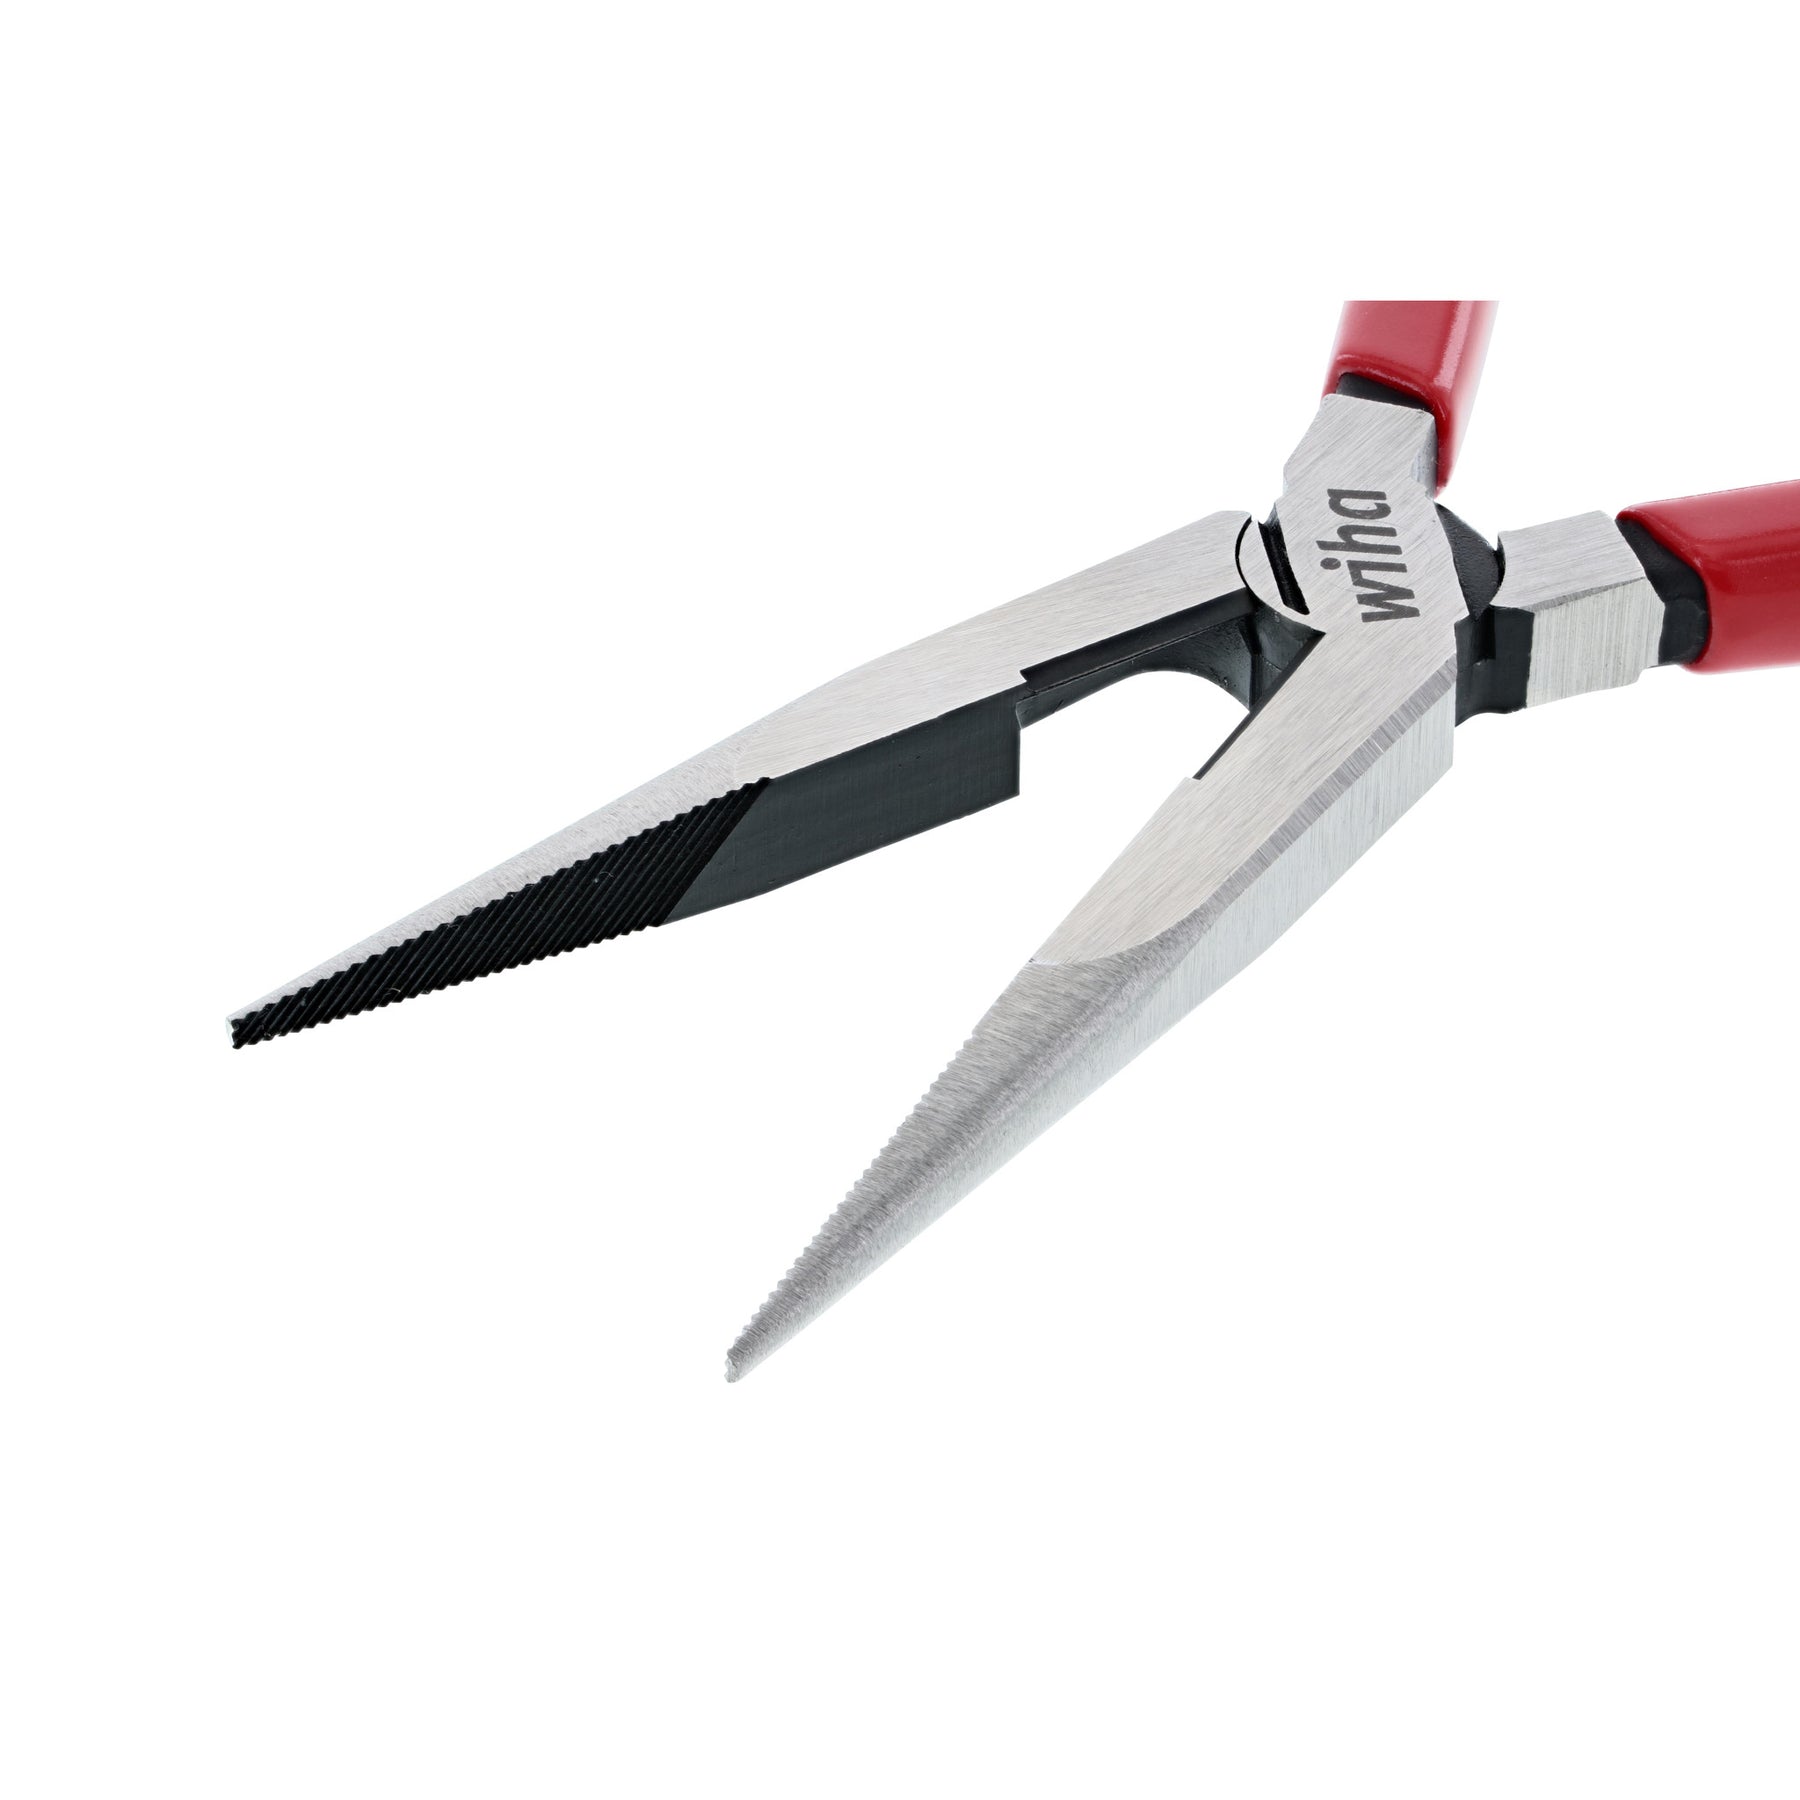 Flat Nose Pliers - Small Narrow